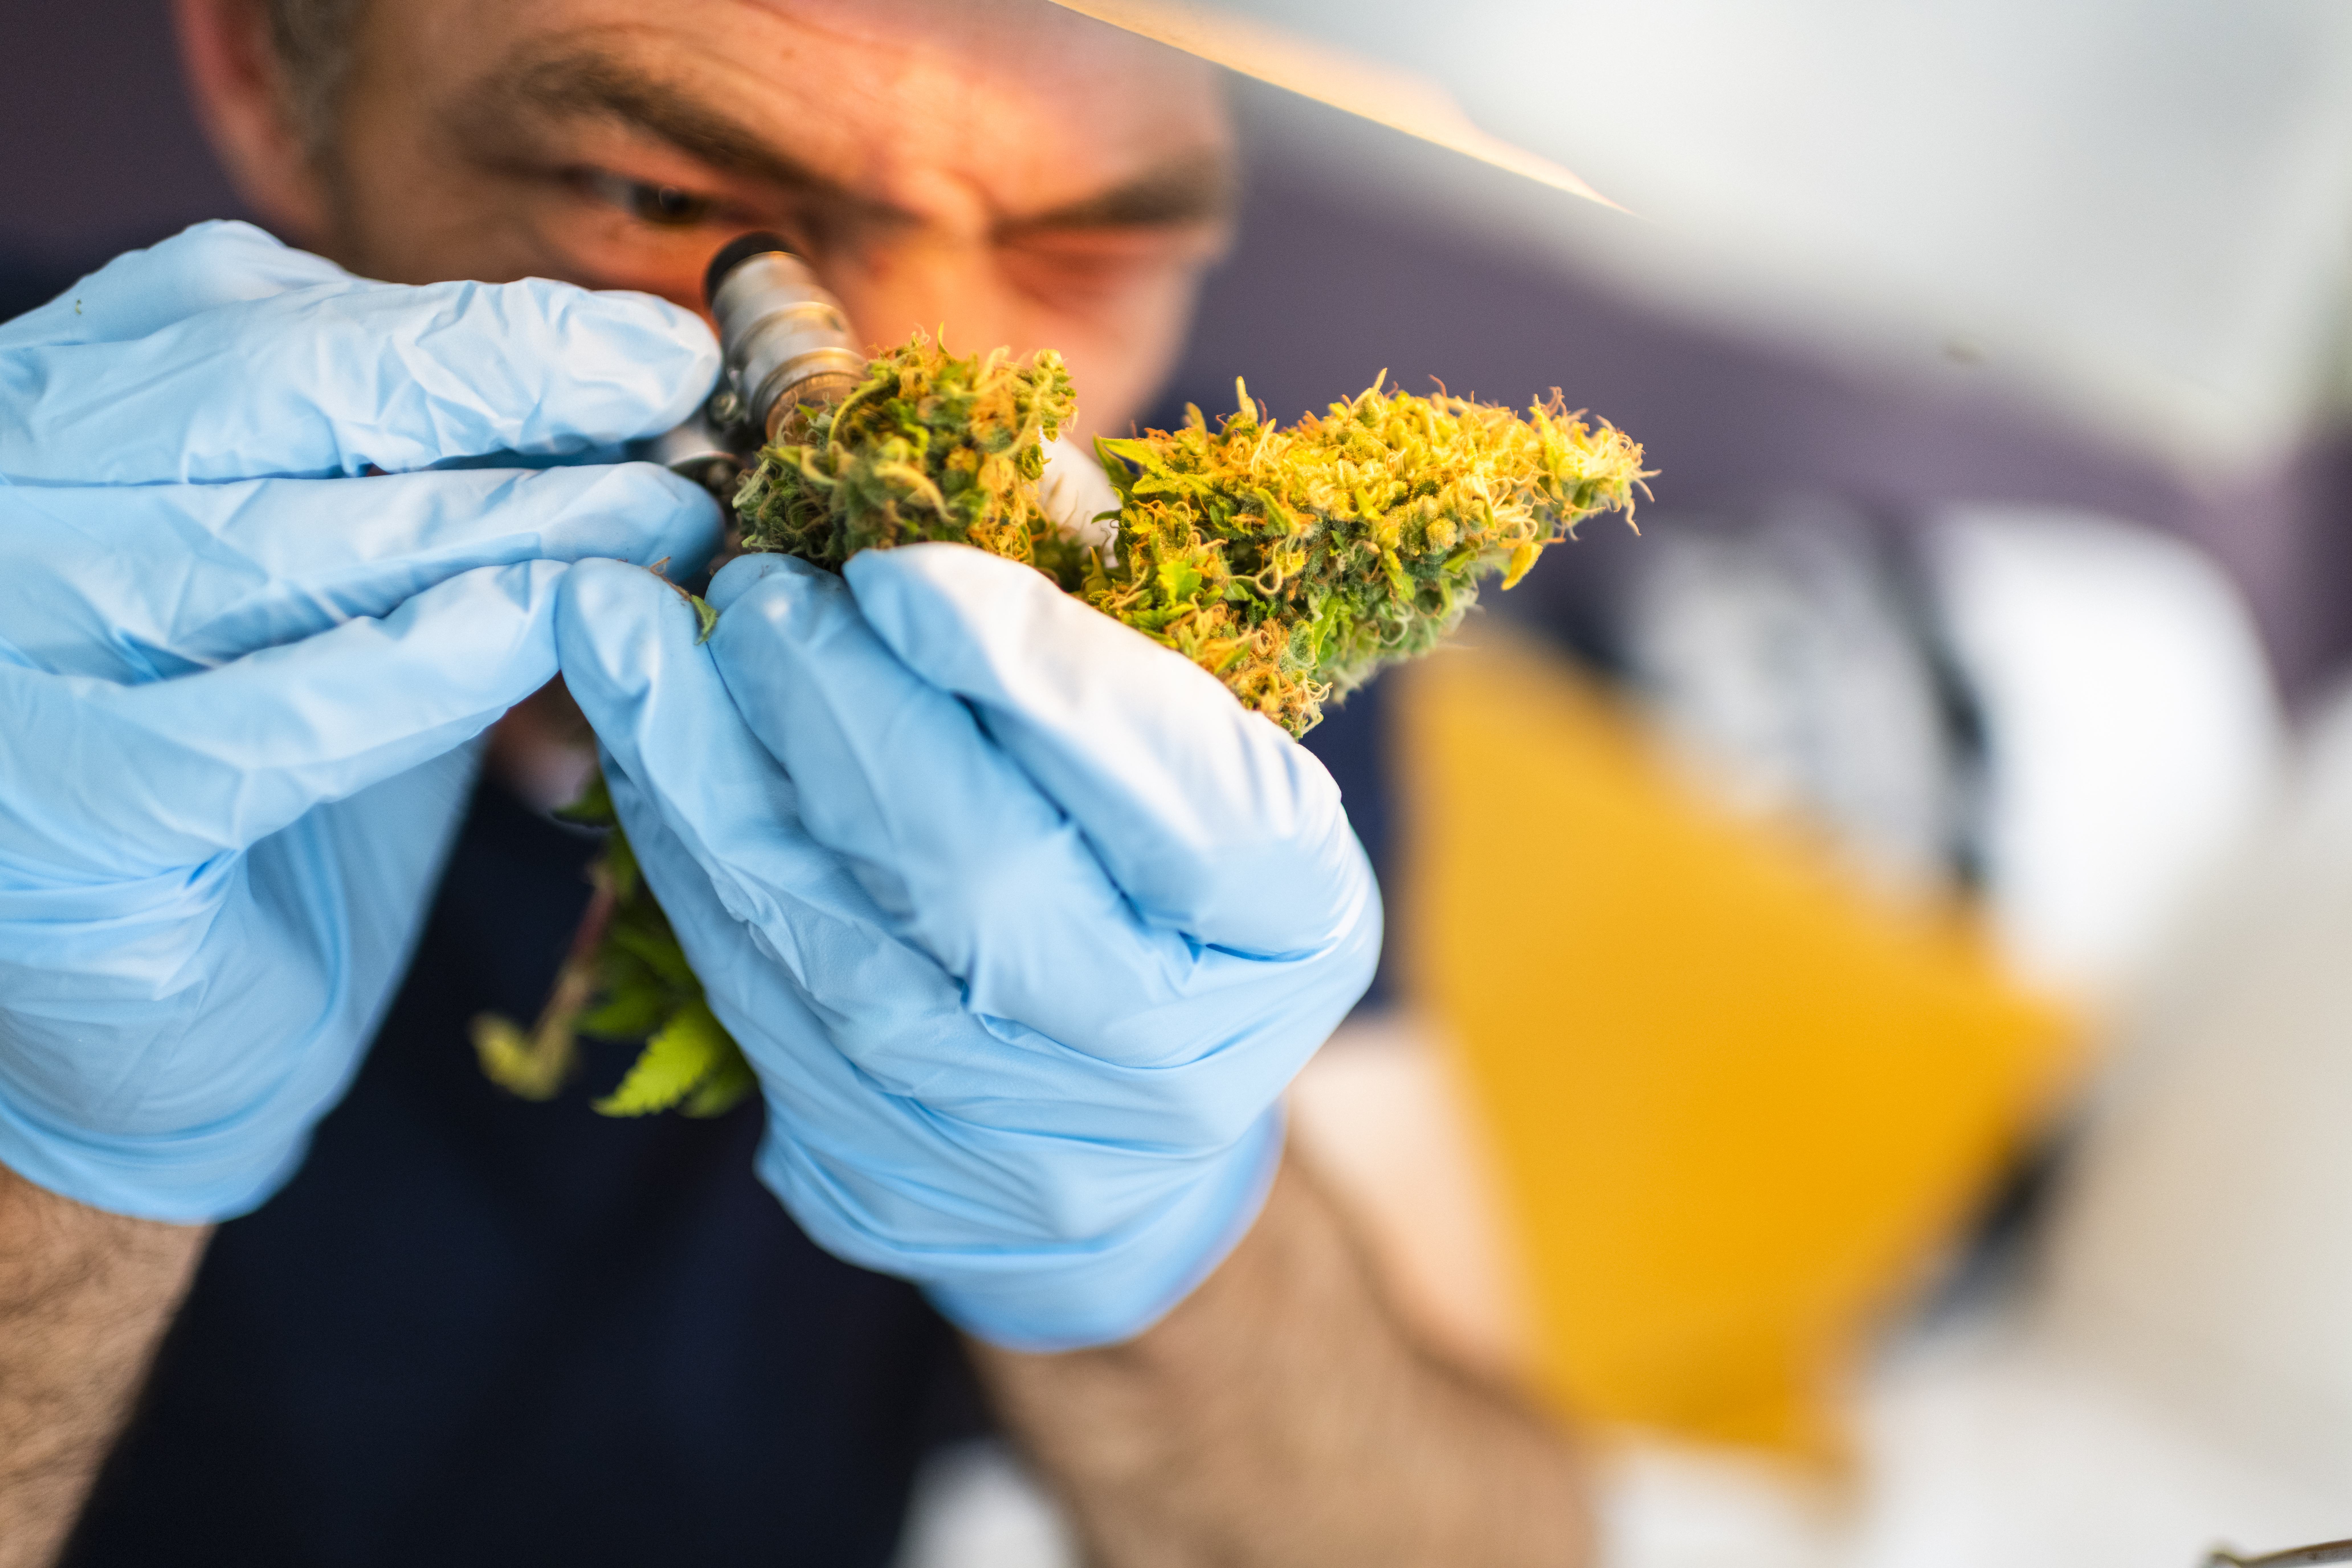 A man with gloves on uses a magnifine glass to inspect a cannabis bud.